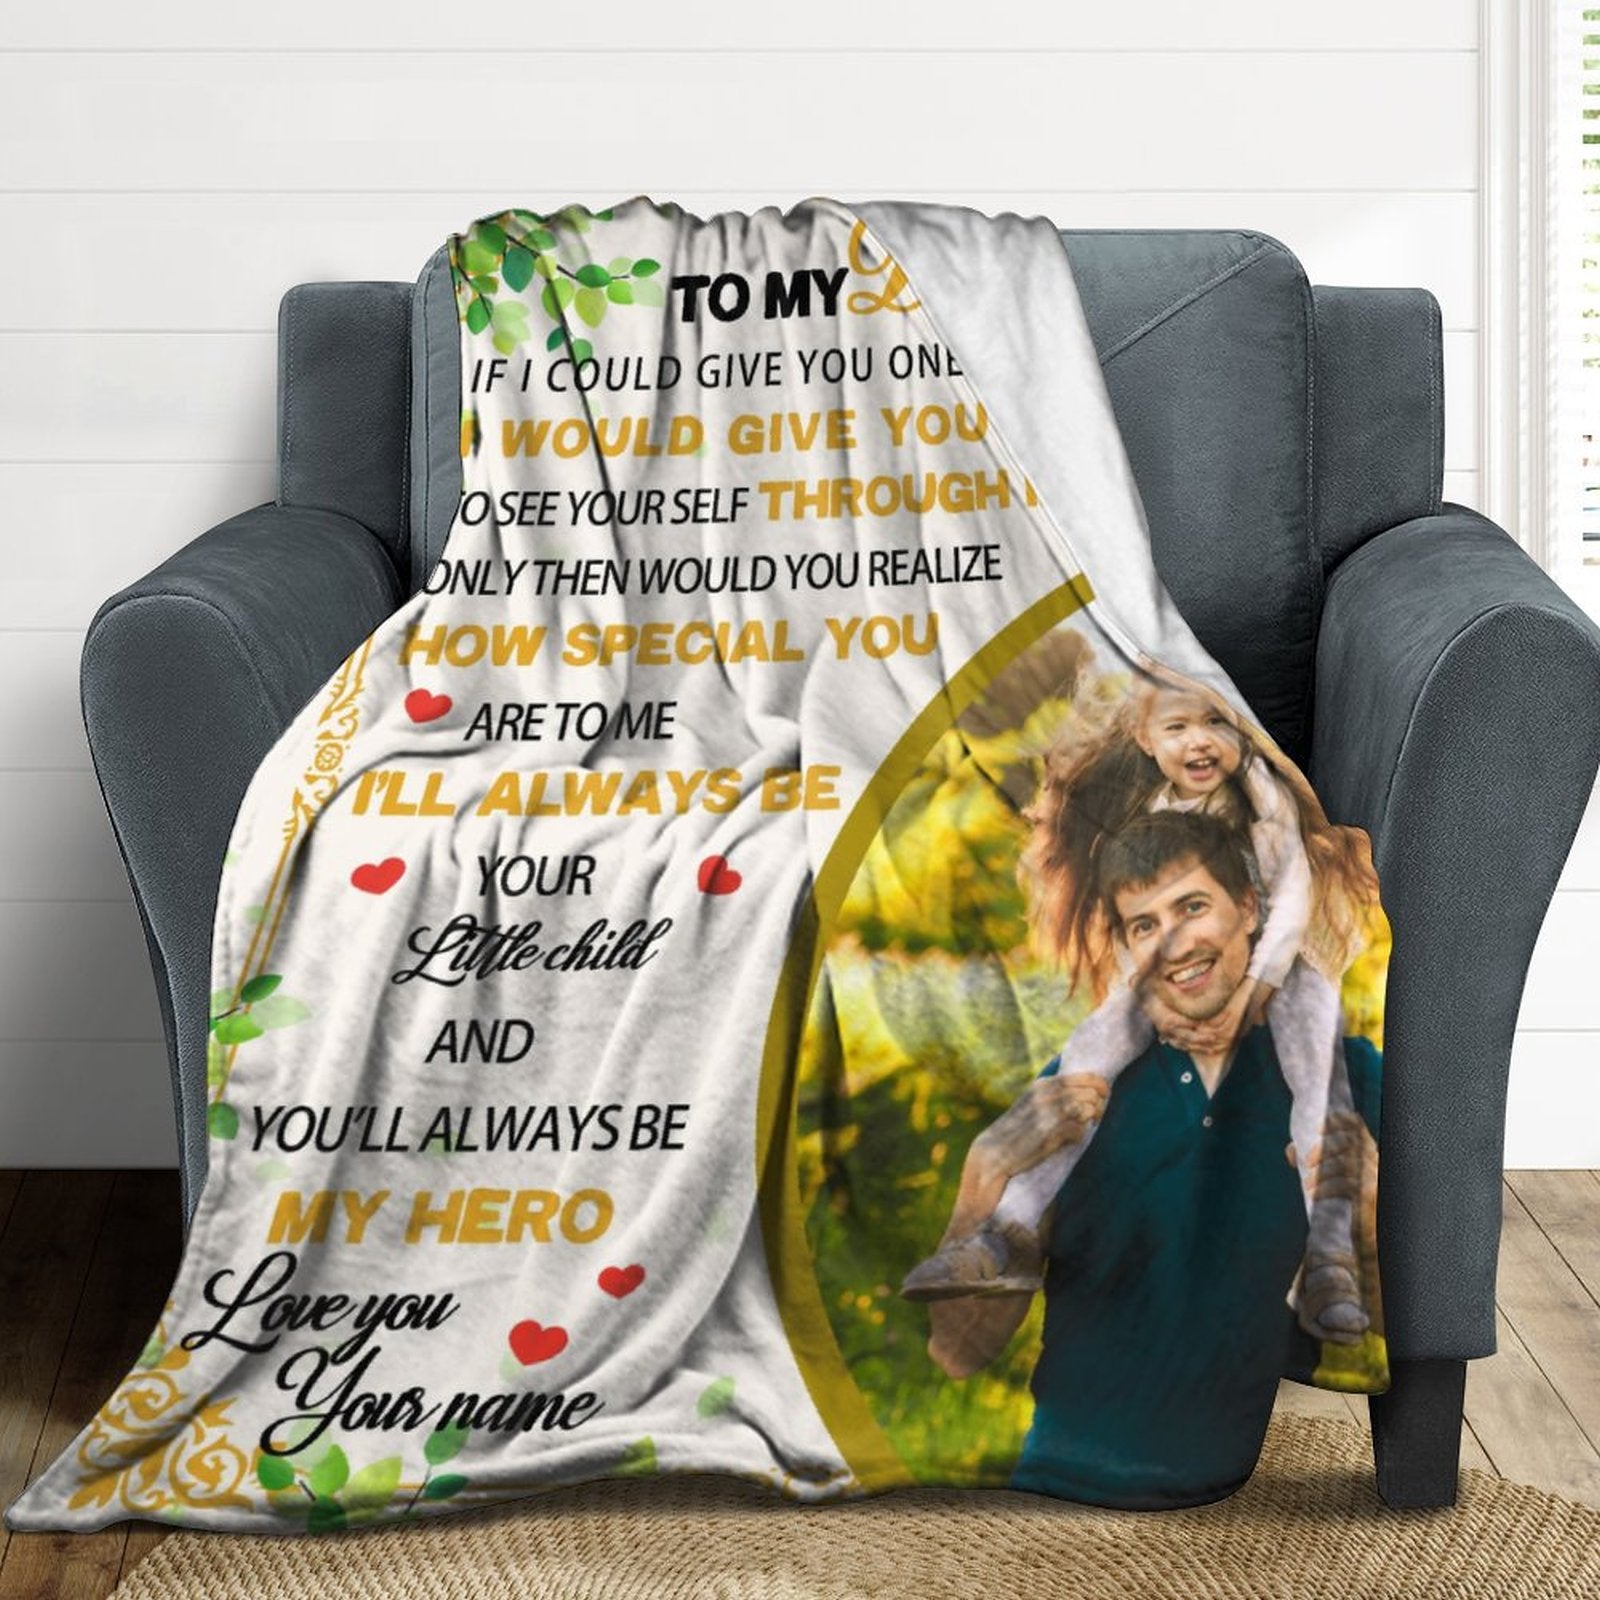 Personalized Blanket for Father's Day, To My Dad Blanket, Dad Photo Blanket, Fathers Day Gifts, Dad Blanket, Family Blanket, Blanket for Dad